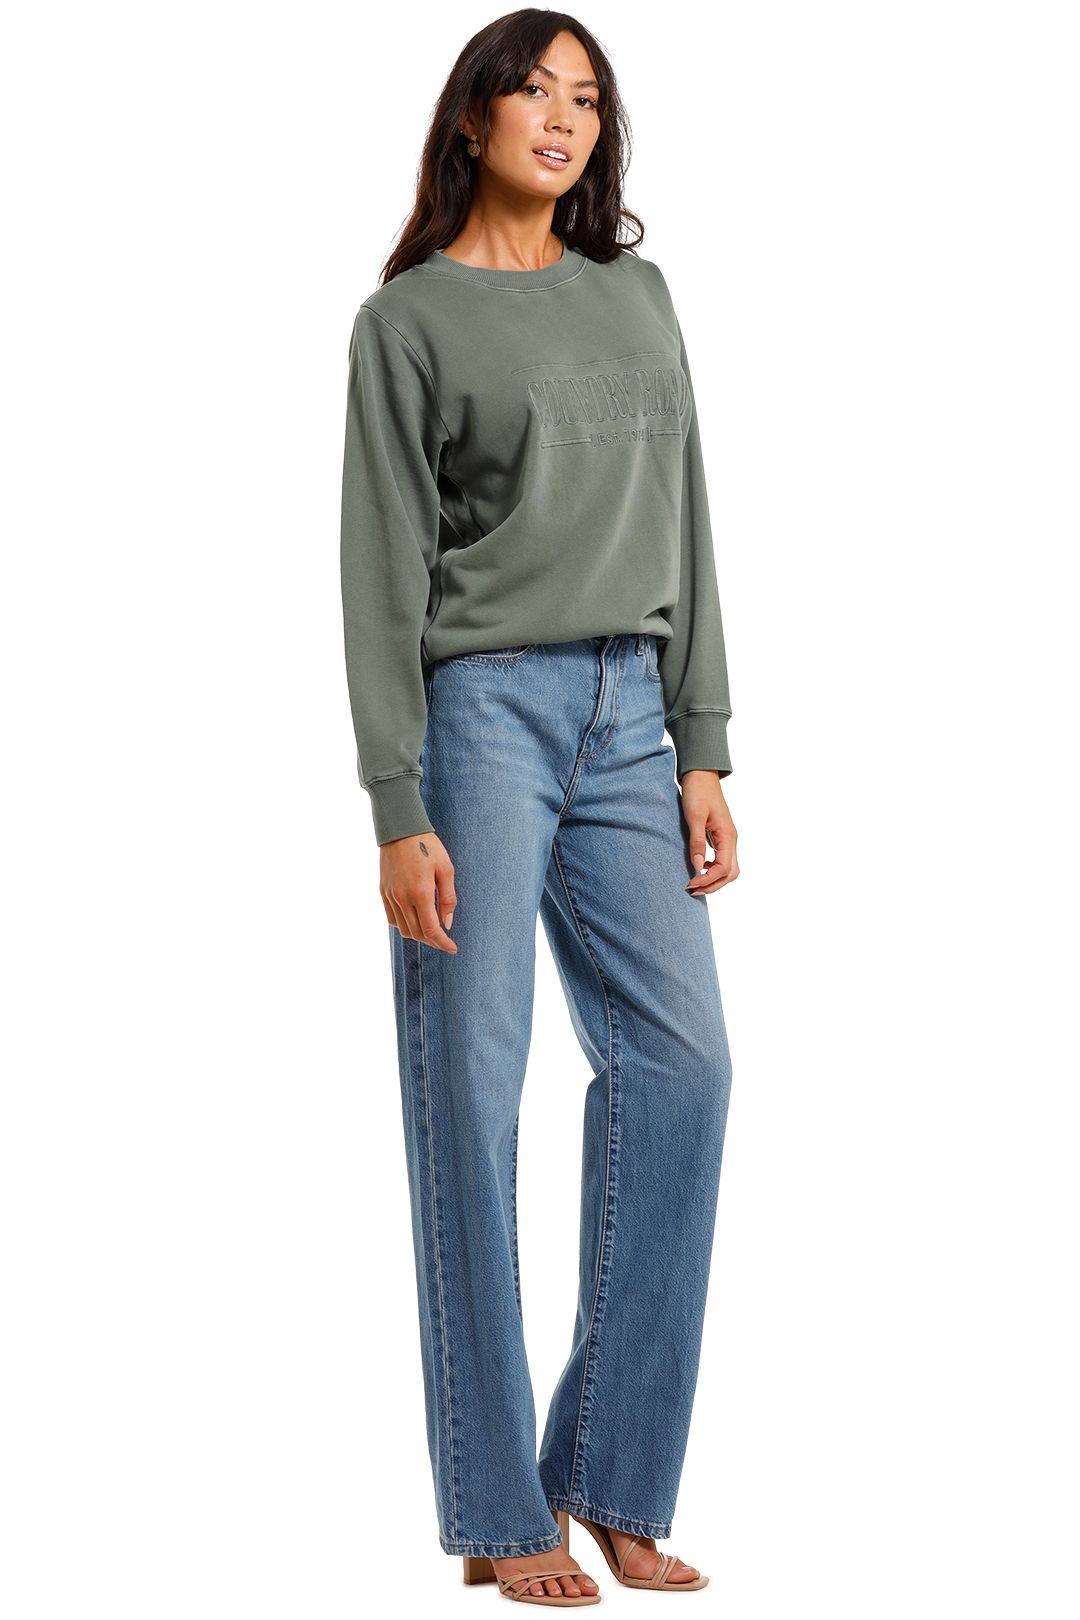 Country Road Heritage Sweat Sage